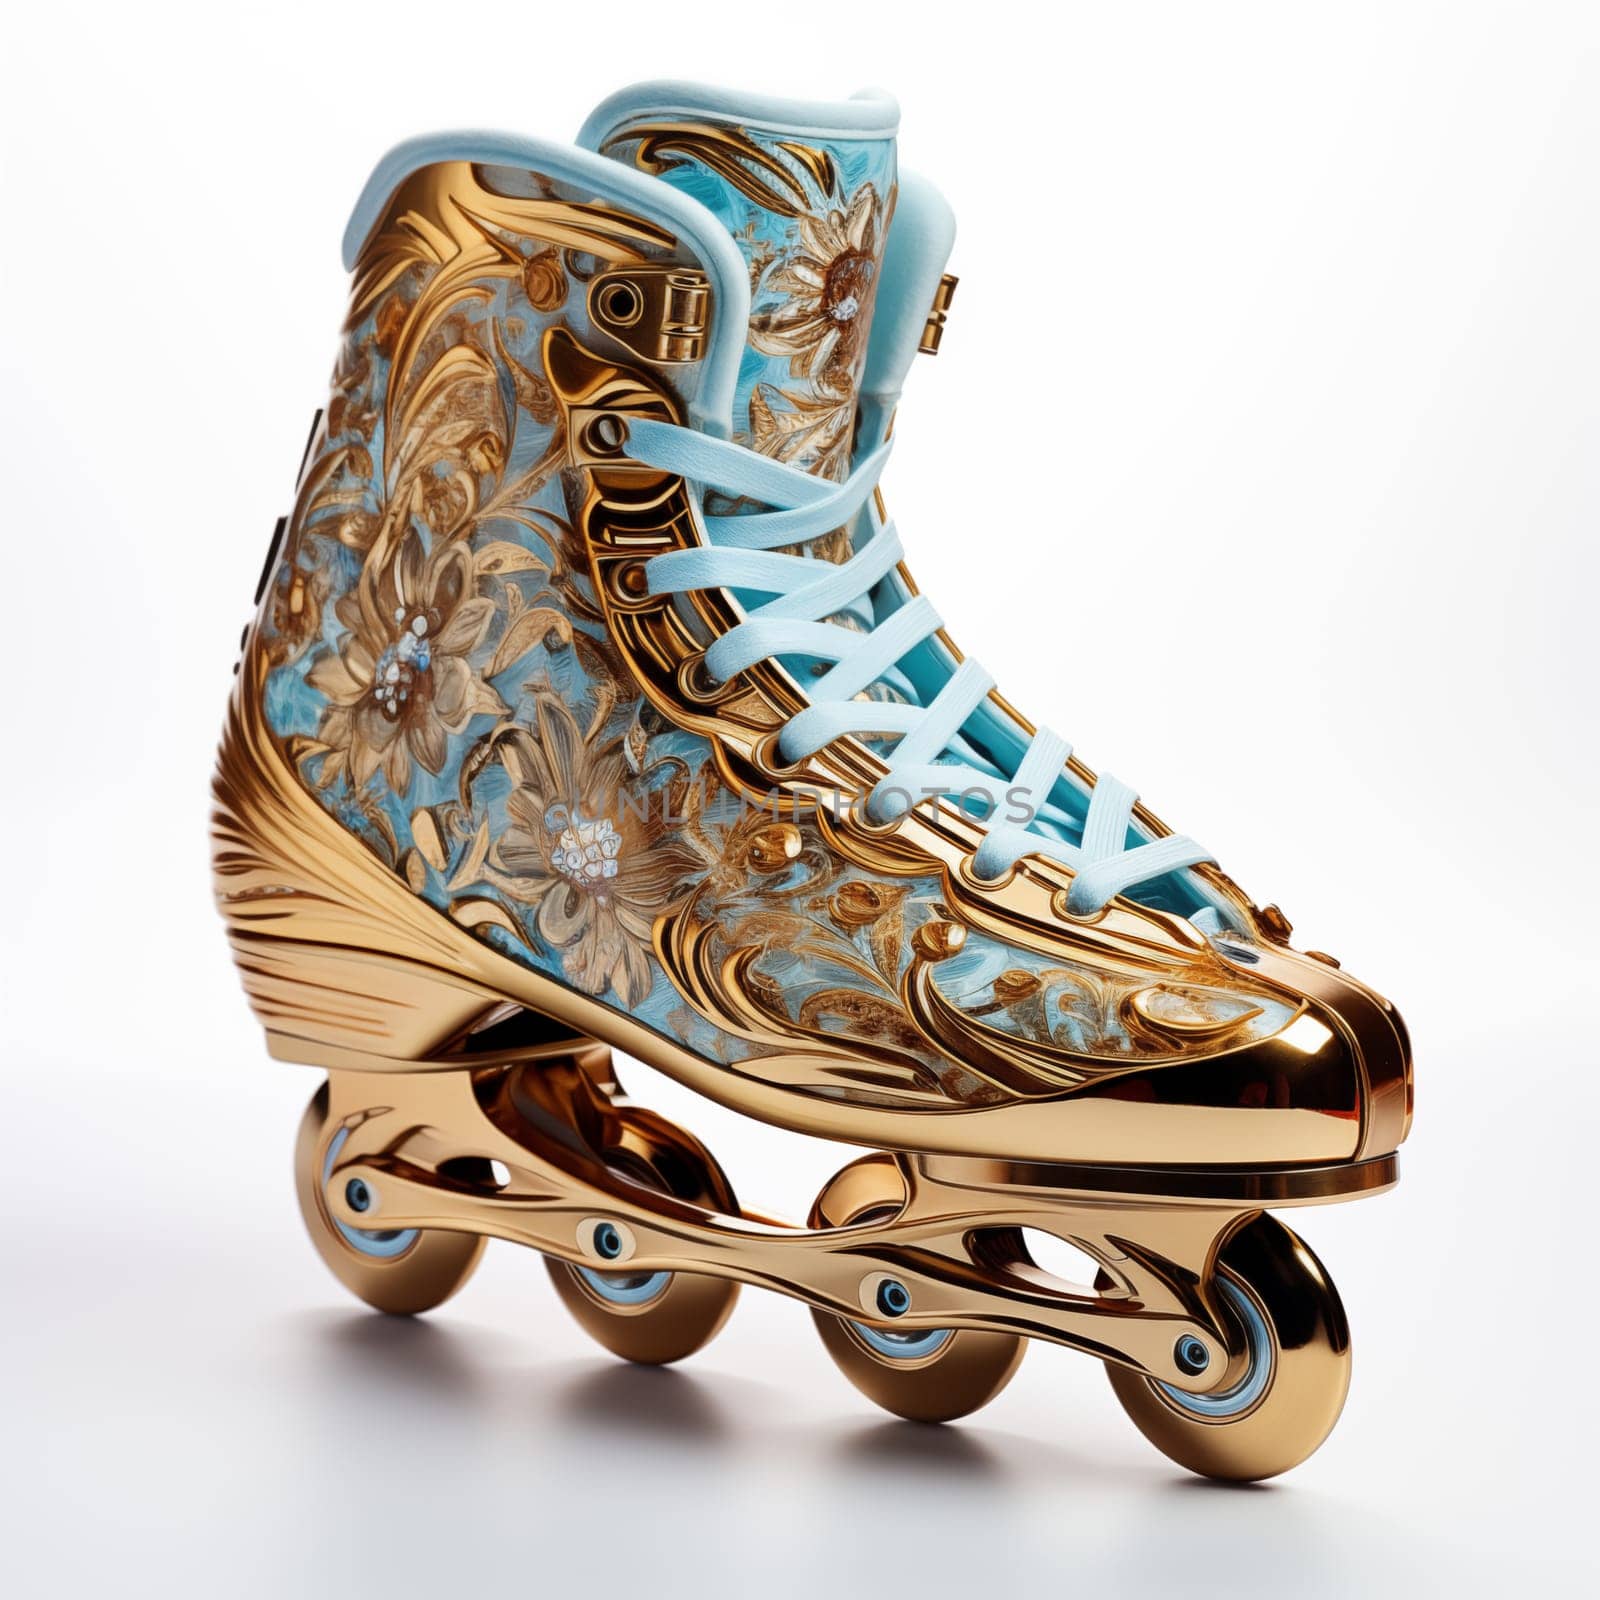 Luxury golden roller skates standing isolated on a white background.